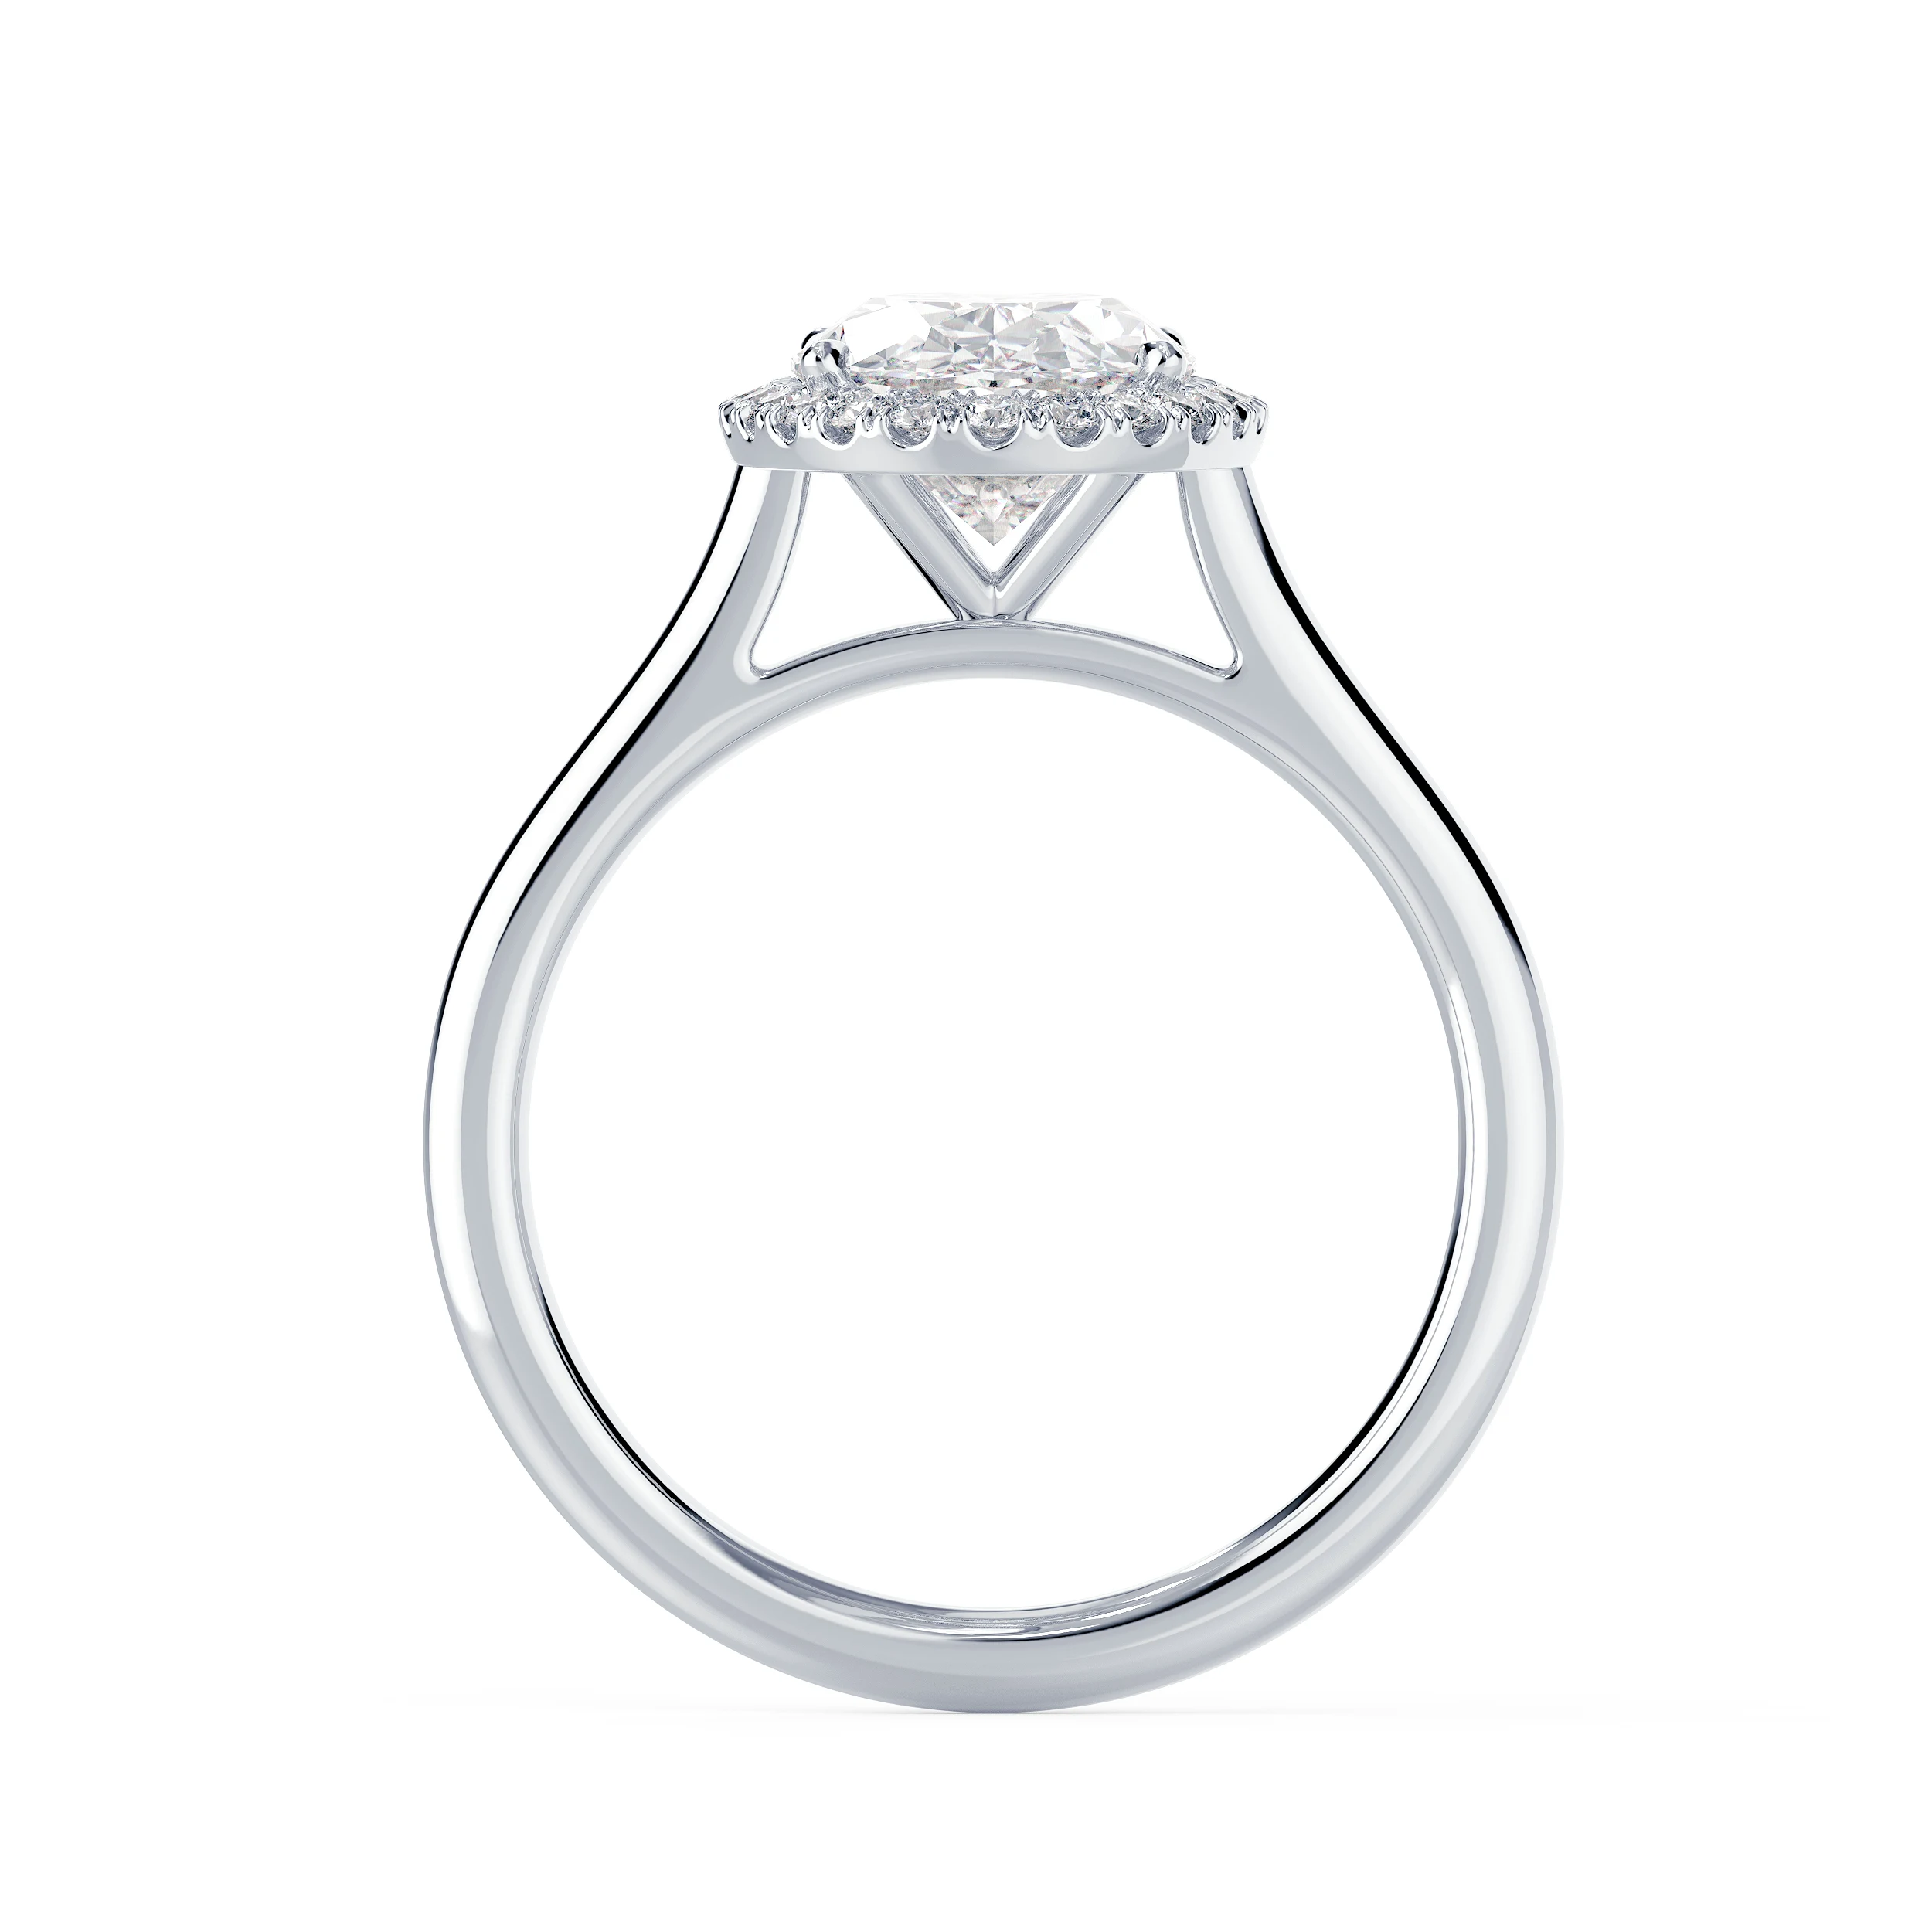 Hand Selected Diamonds Oval Single Halo Diamond Engagement Ring in White Gold (Profile View)